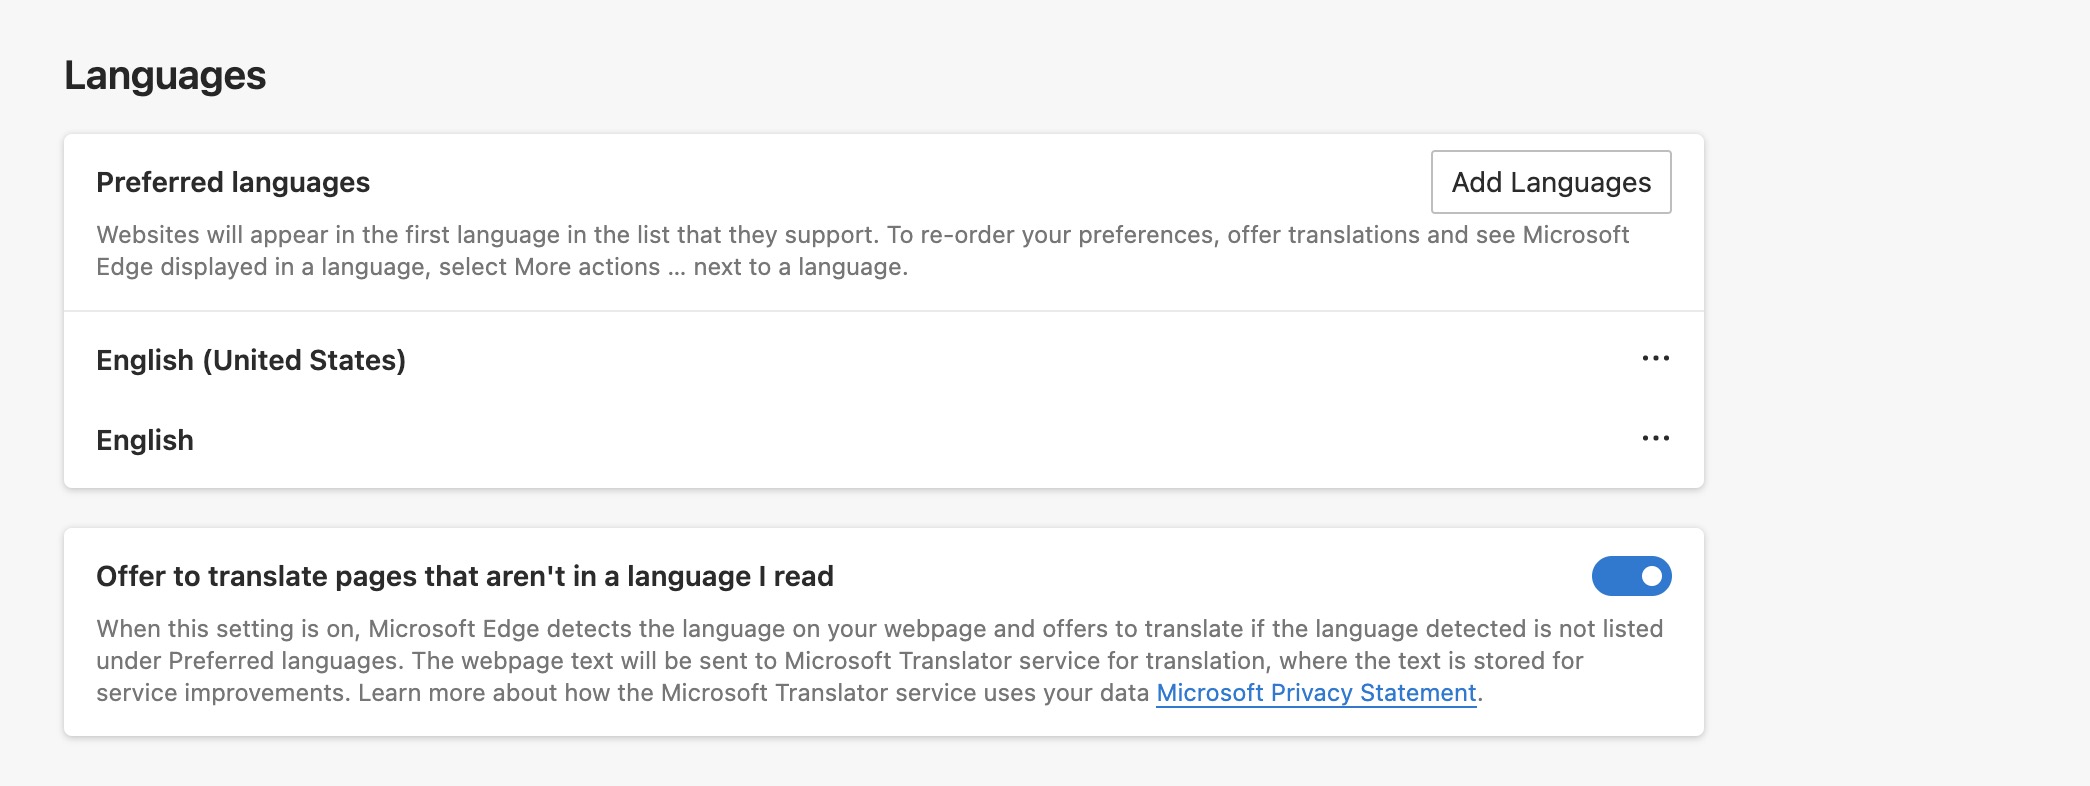 How to translate pages on Microsoft Edge